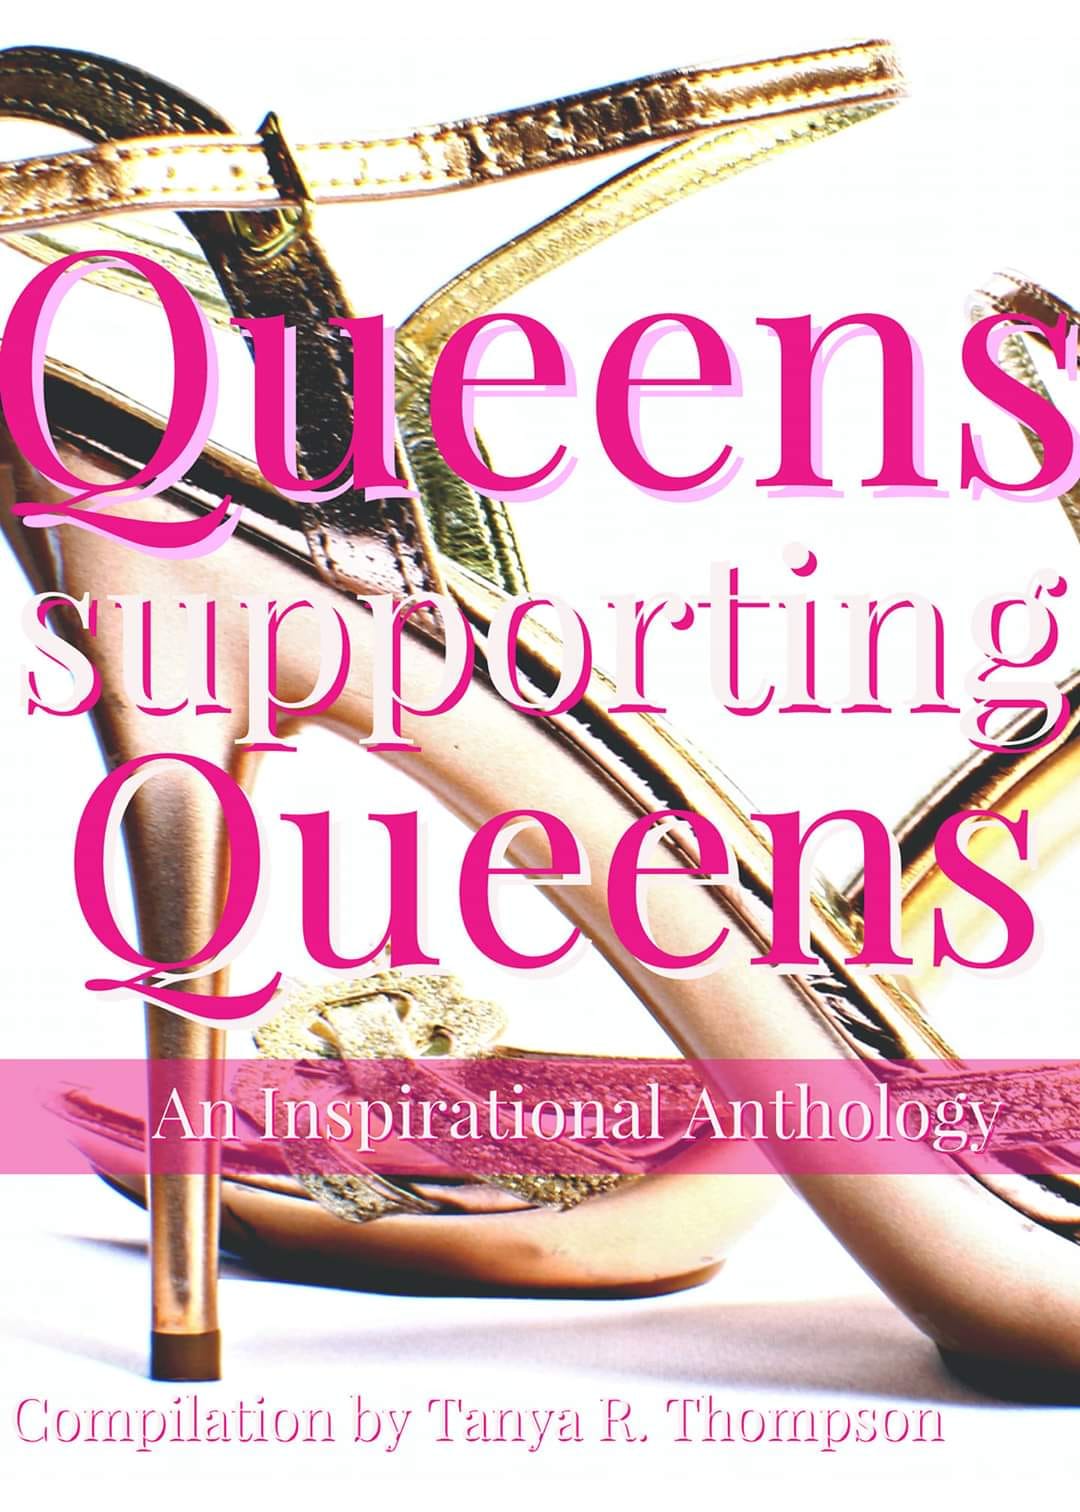 Book Release Alert! Queens Supoorting Queens An Inspirational Anthology